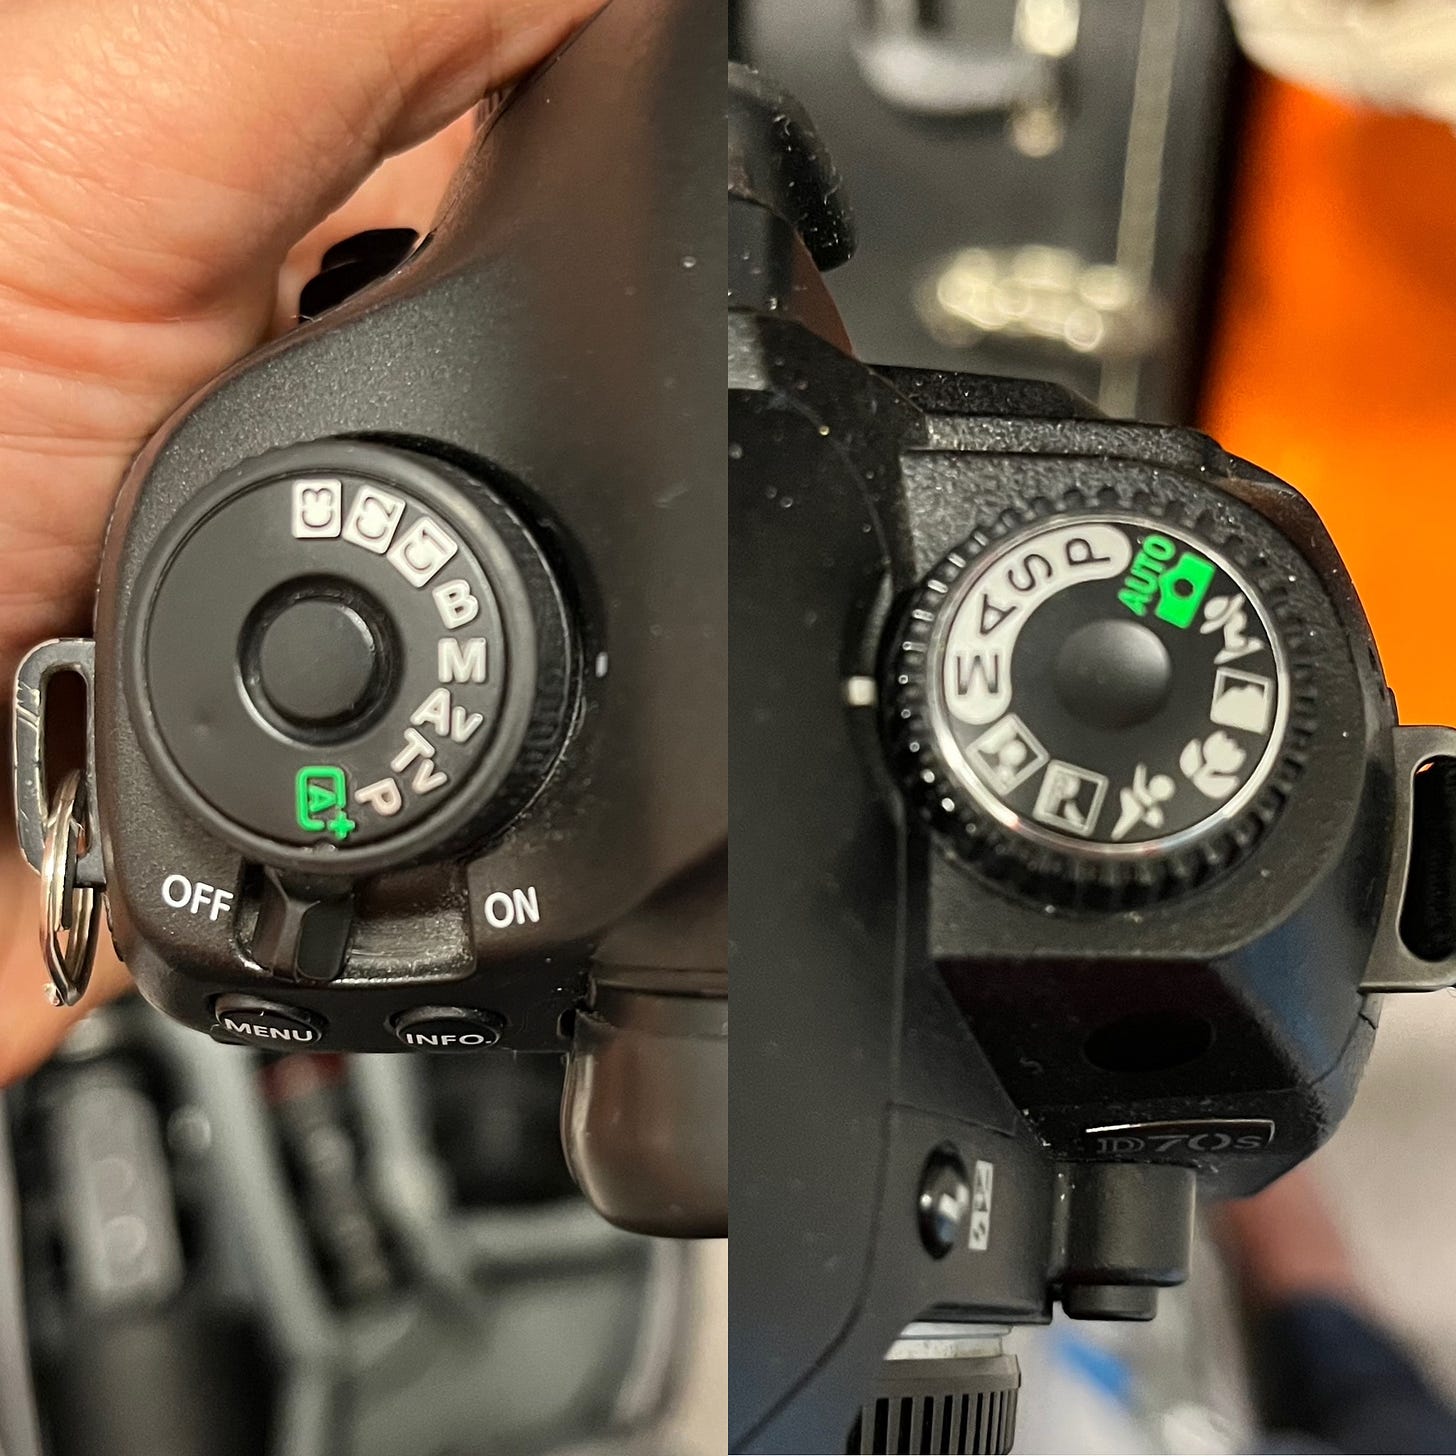 two cameras and their settings